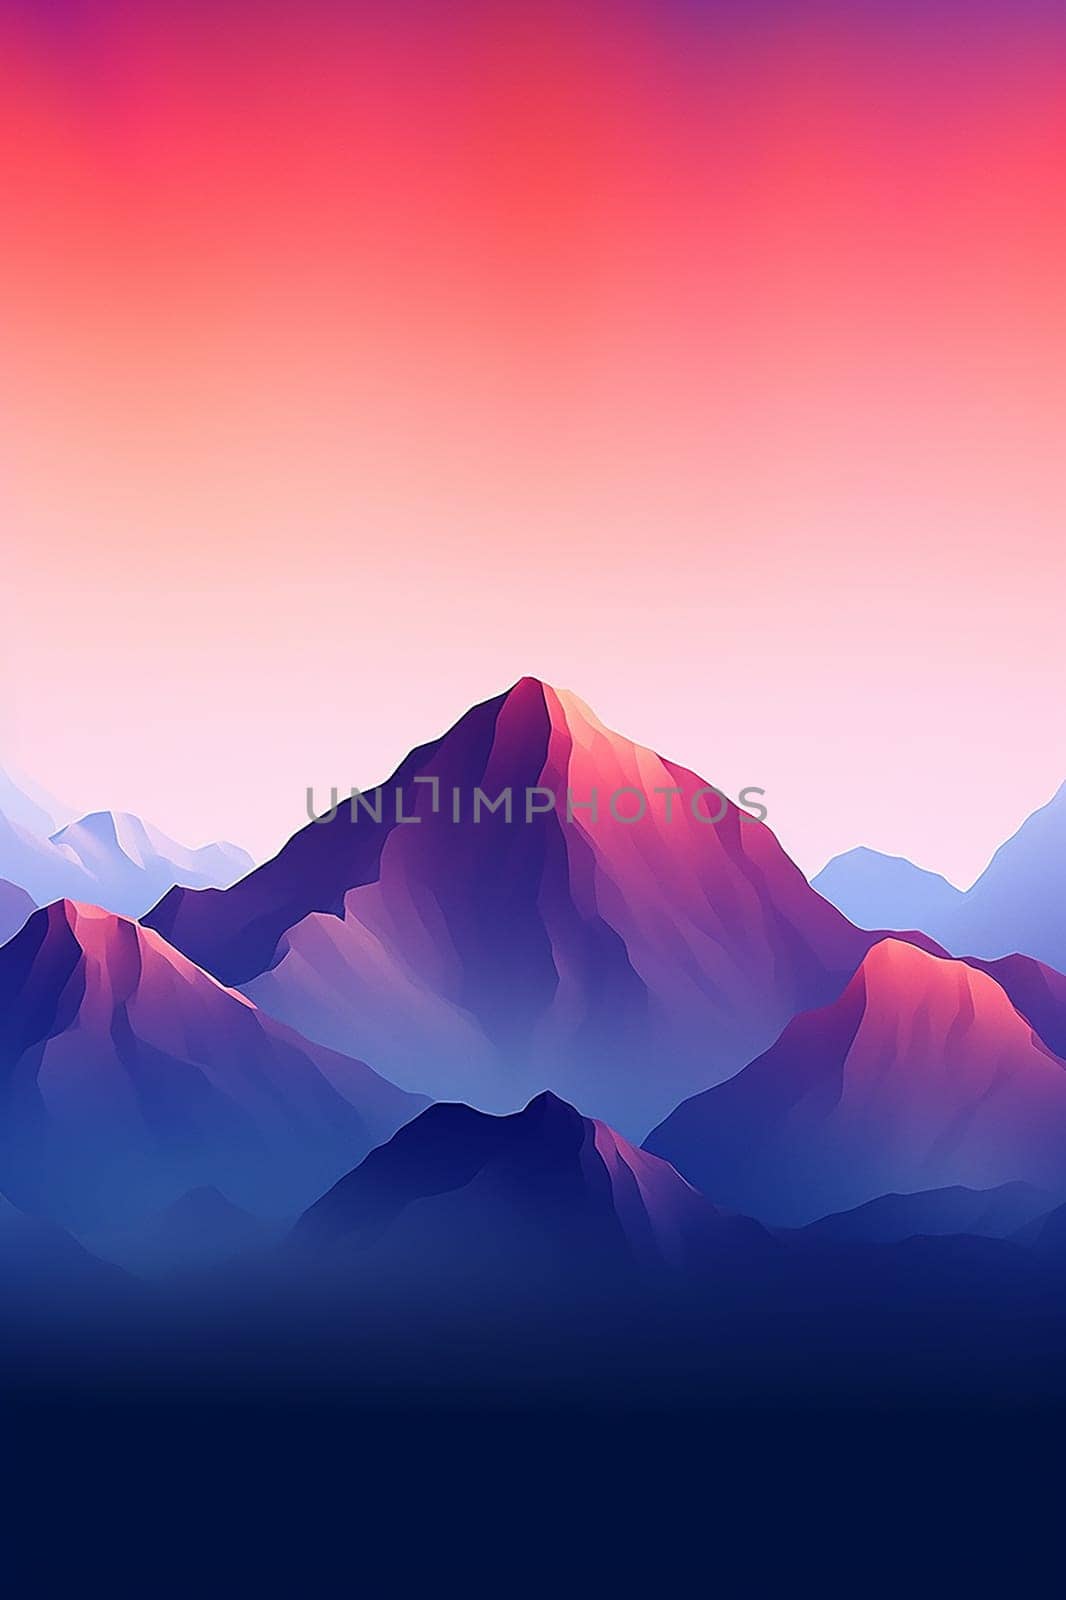 Sunset vector illustration of a mountain, silhouette of a nature hill, smartphone wallpaper